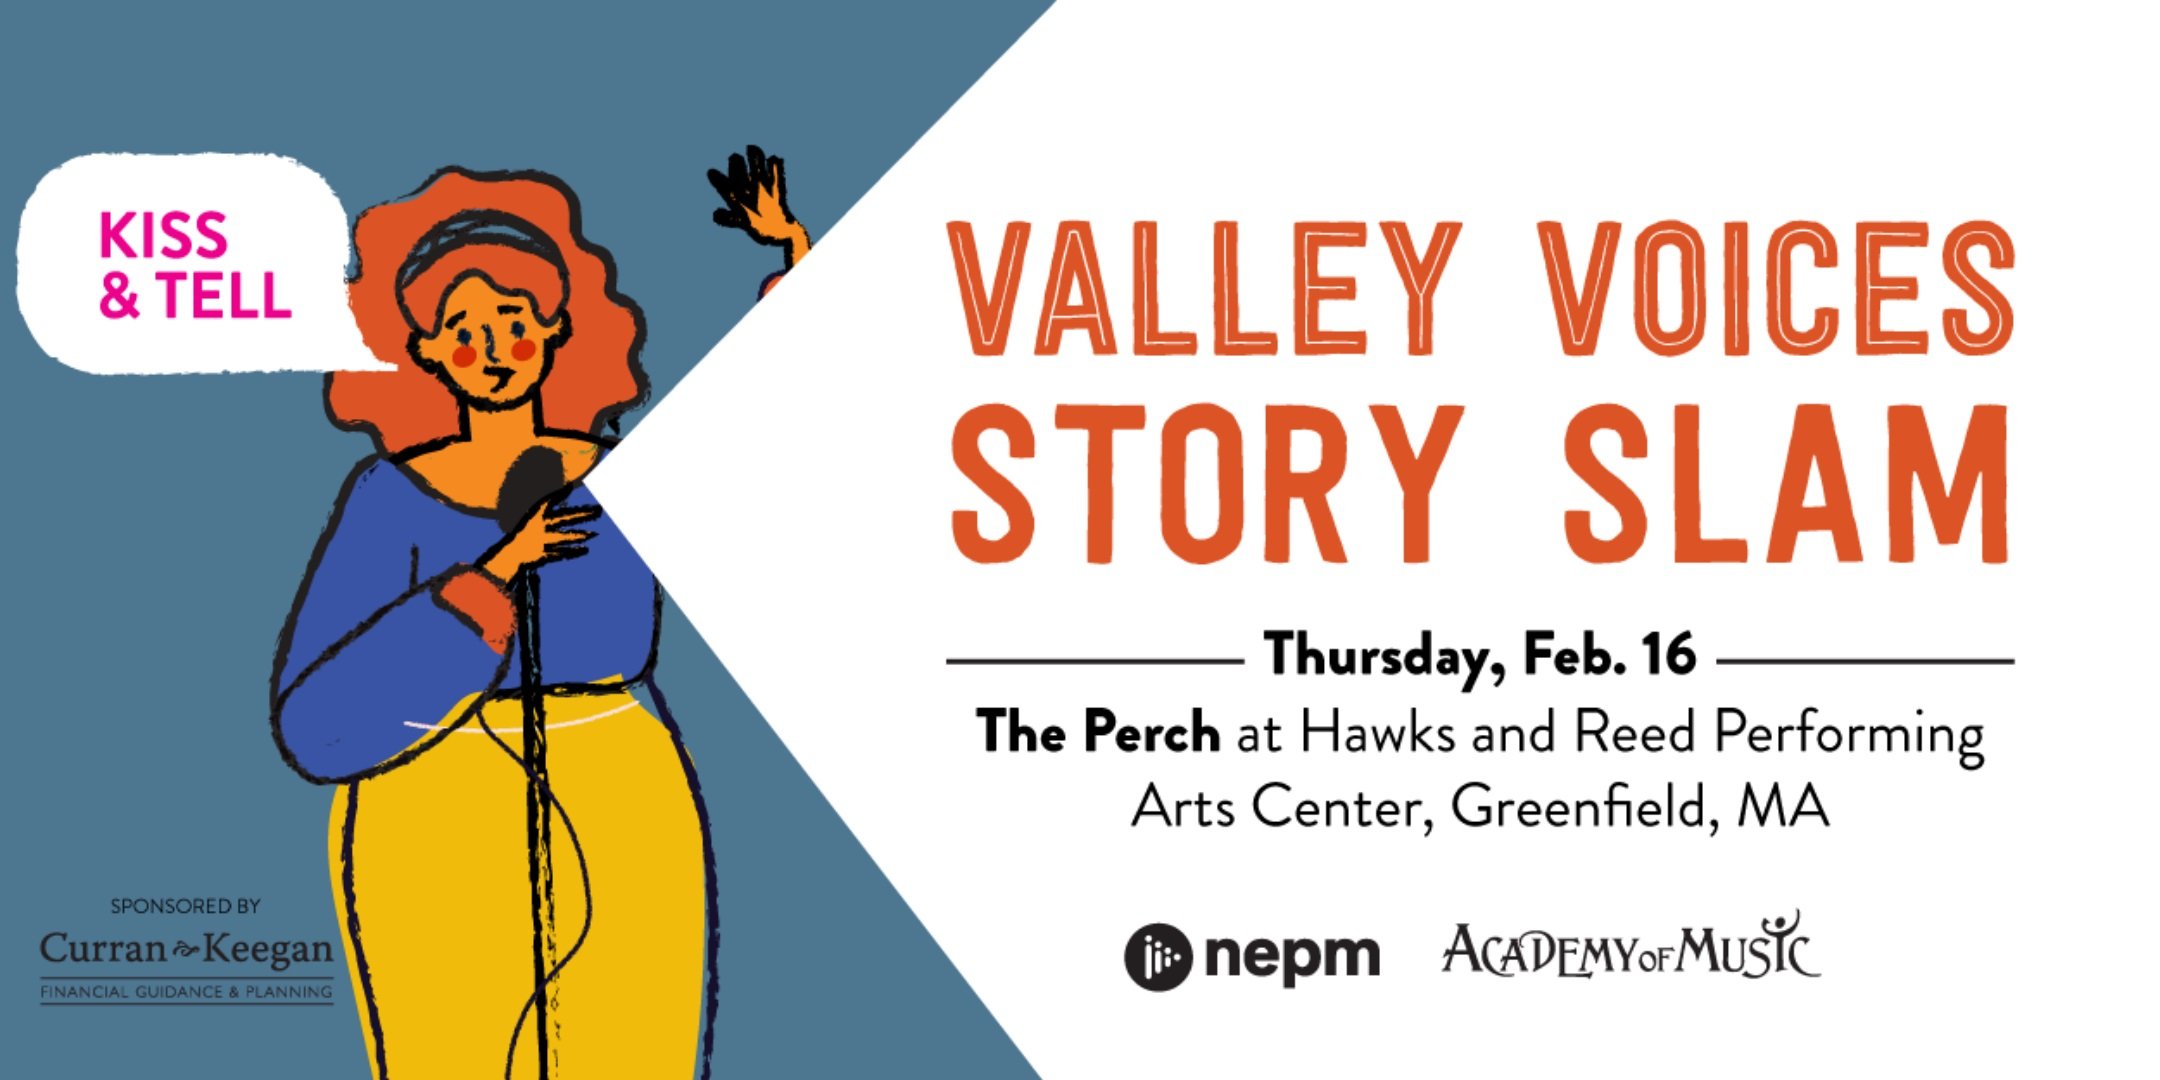 Valley Voices Story Slam: Kiss & Tell